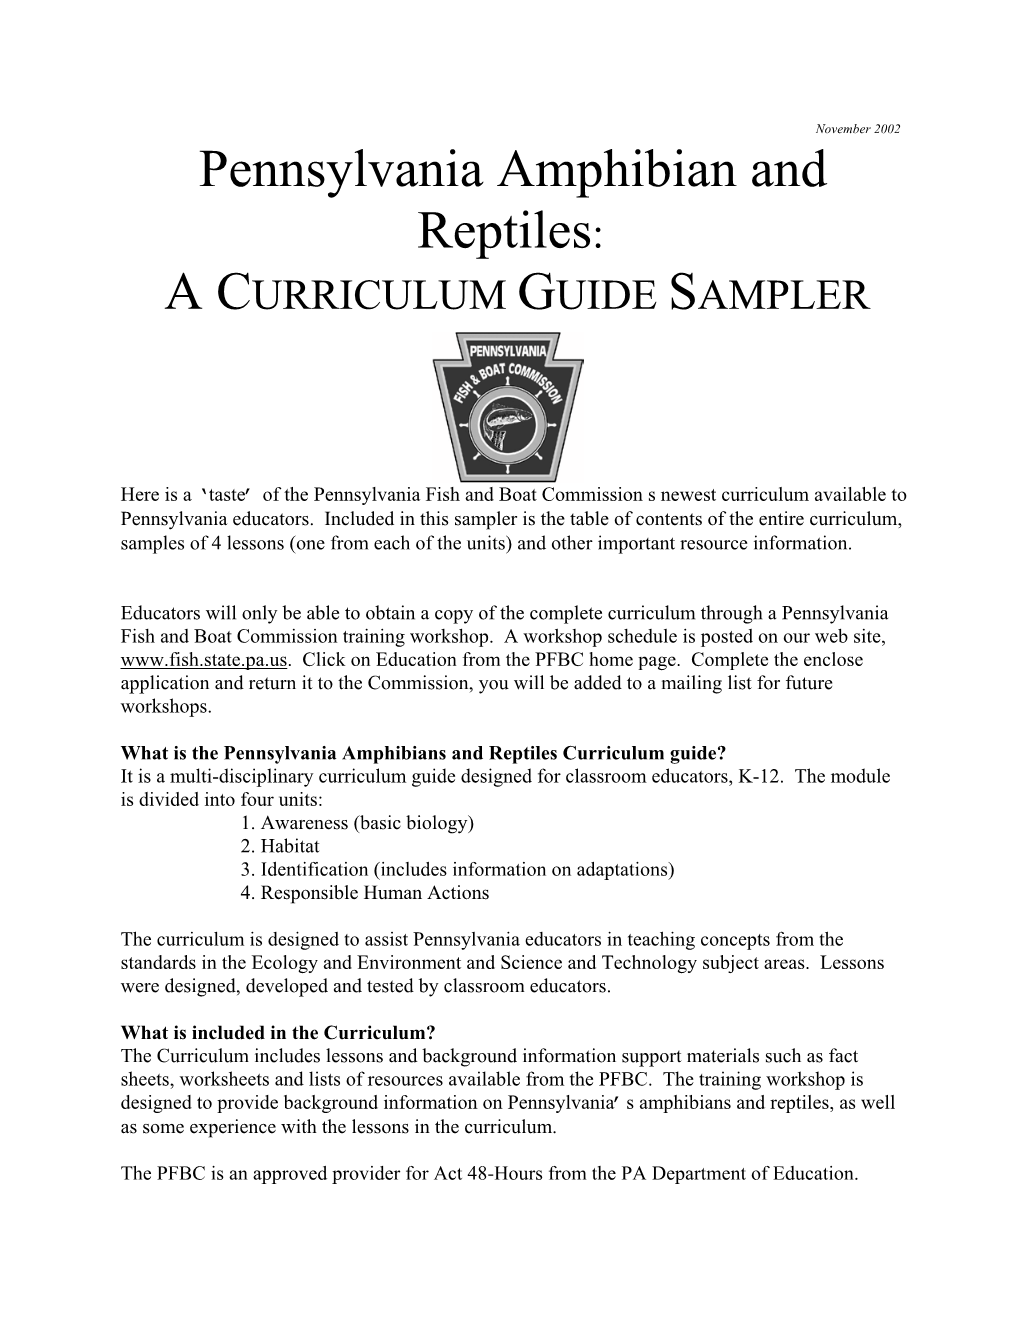 PA Amphibians and Reptiles Curriculum Guide Sampler